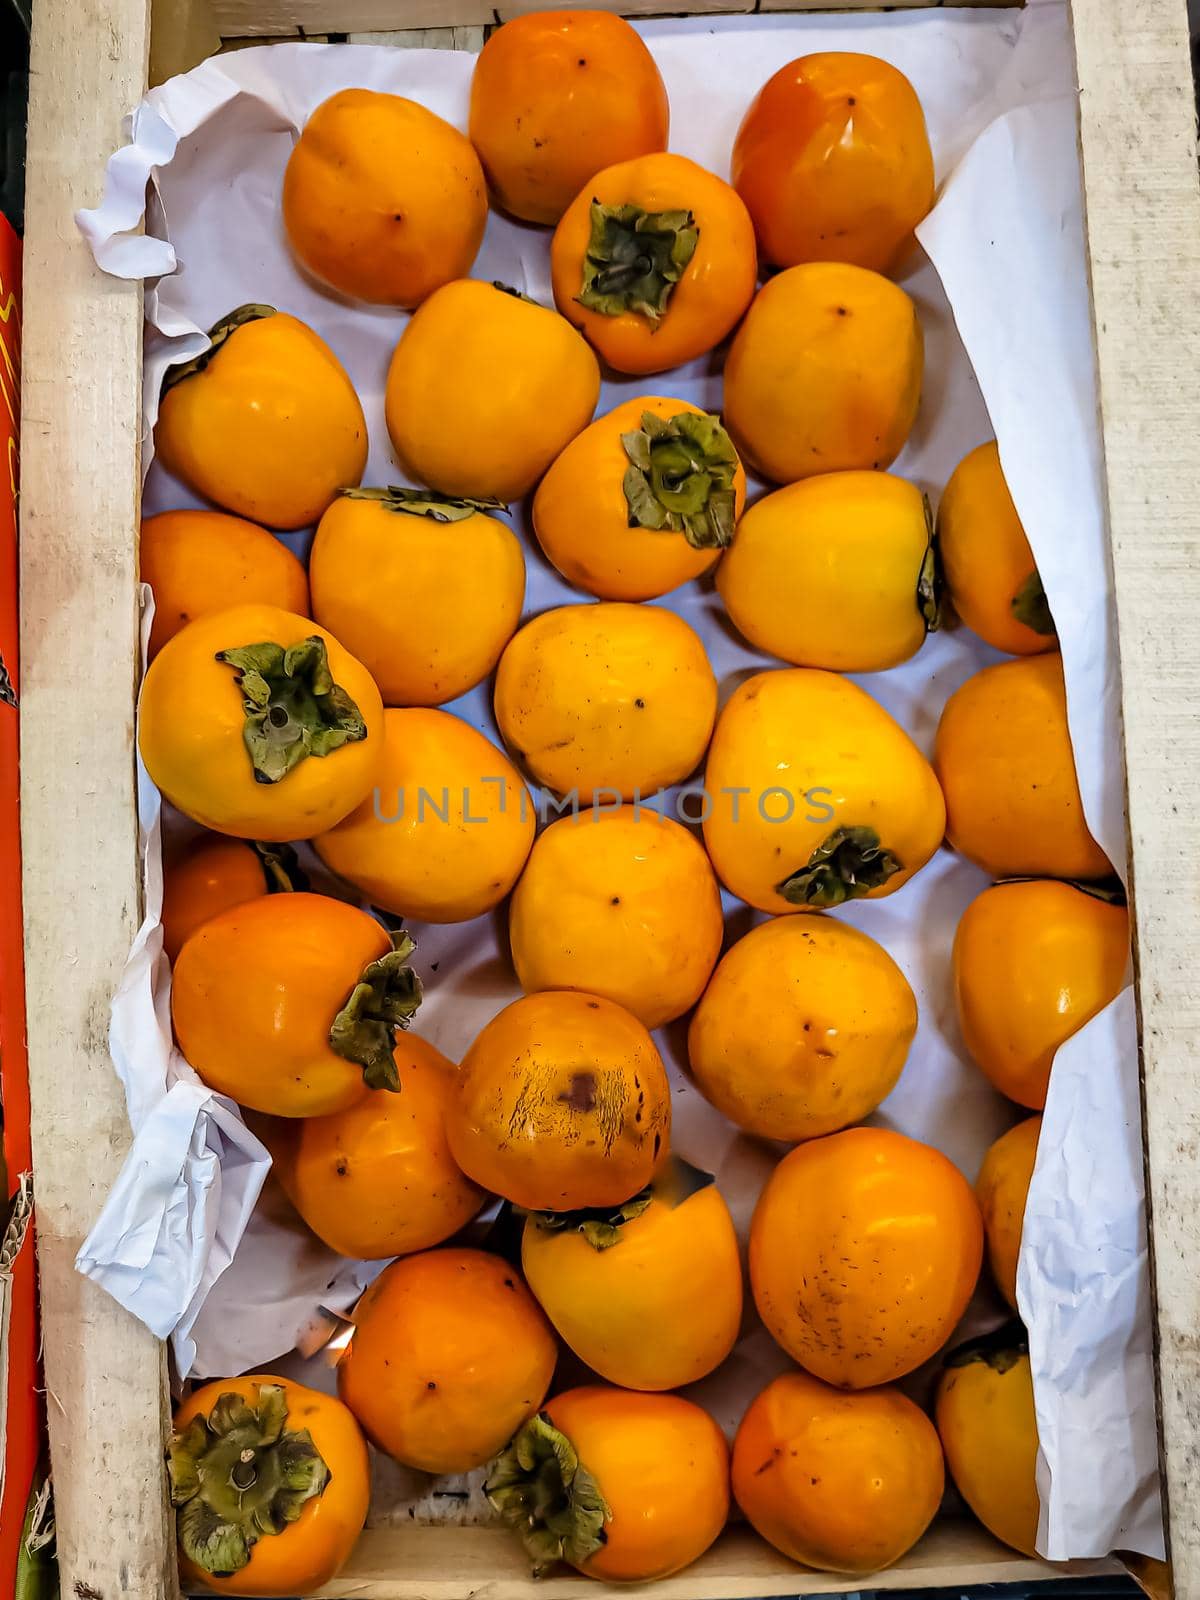 Fresh persimmon fruits are in a box in the store by Milanchikov